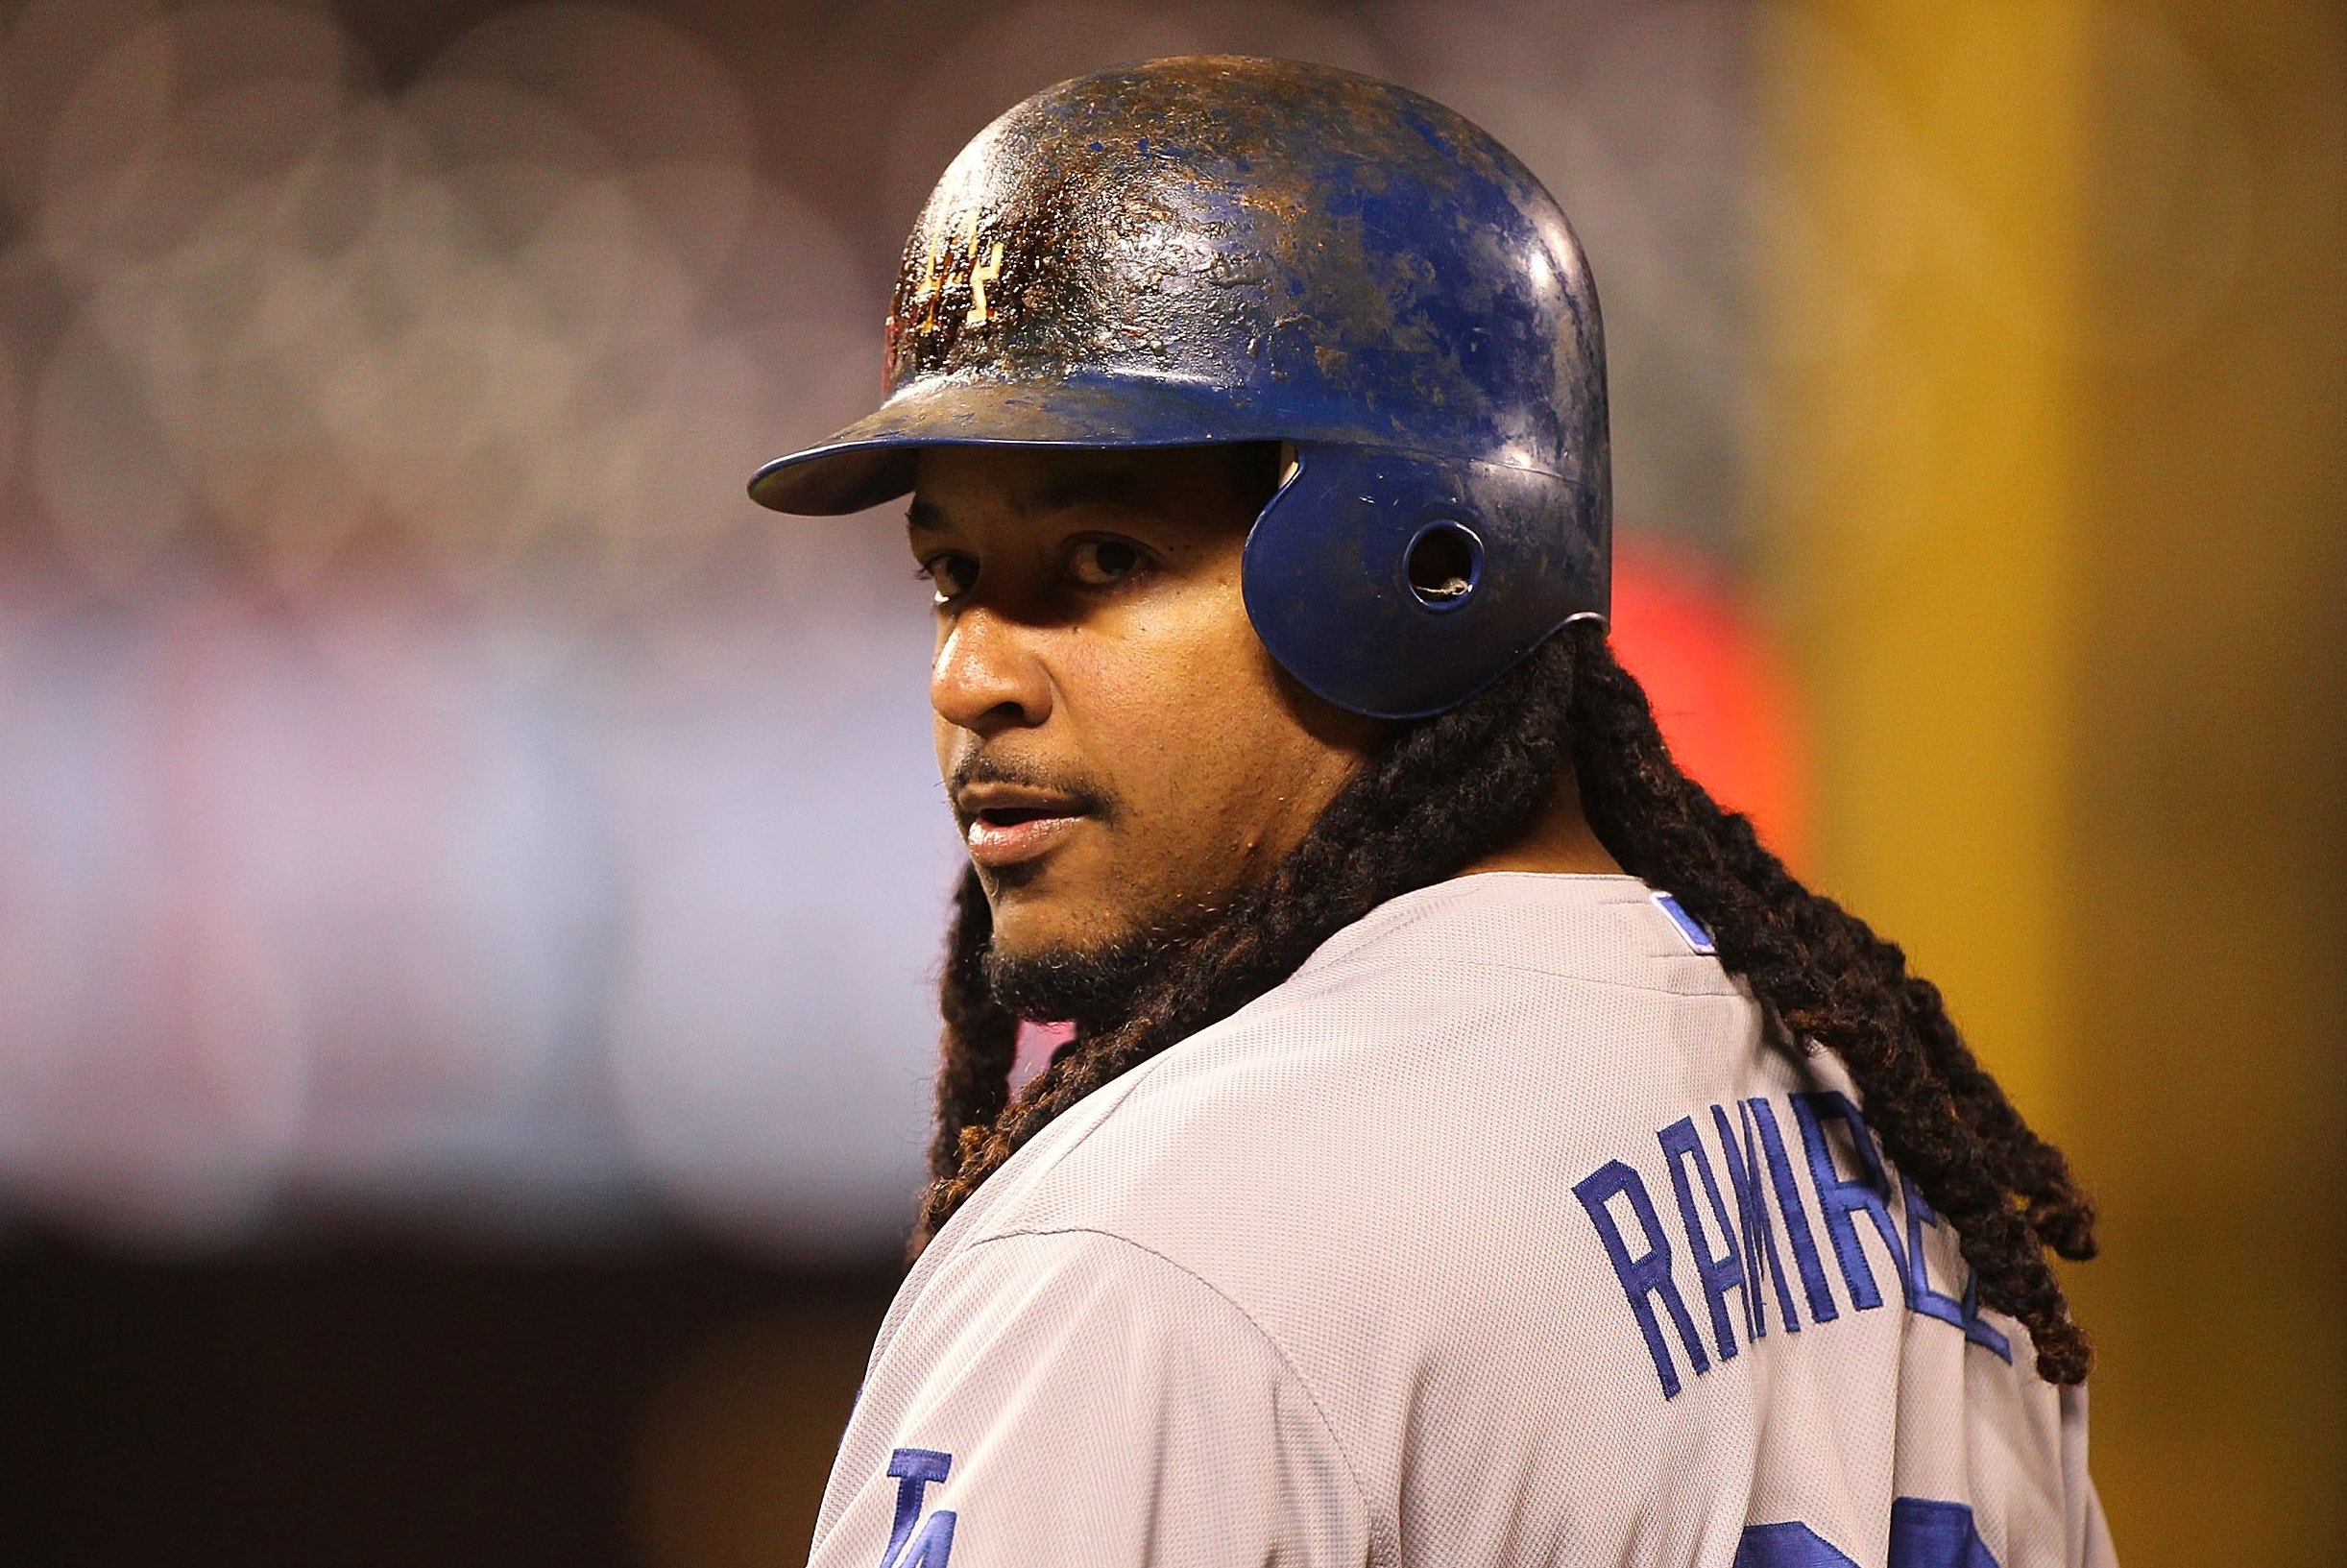 280 Tampa Bay Rays Manny Ramirez Photos & High Res Pictures - Getty Images